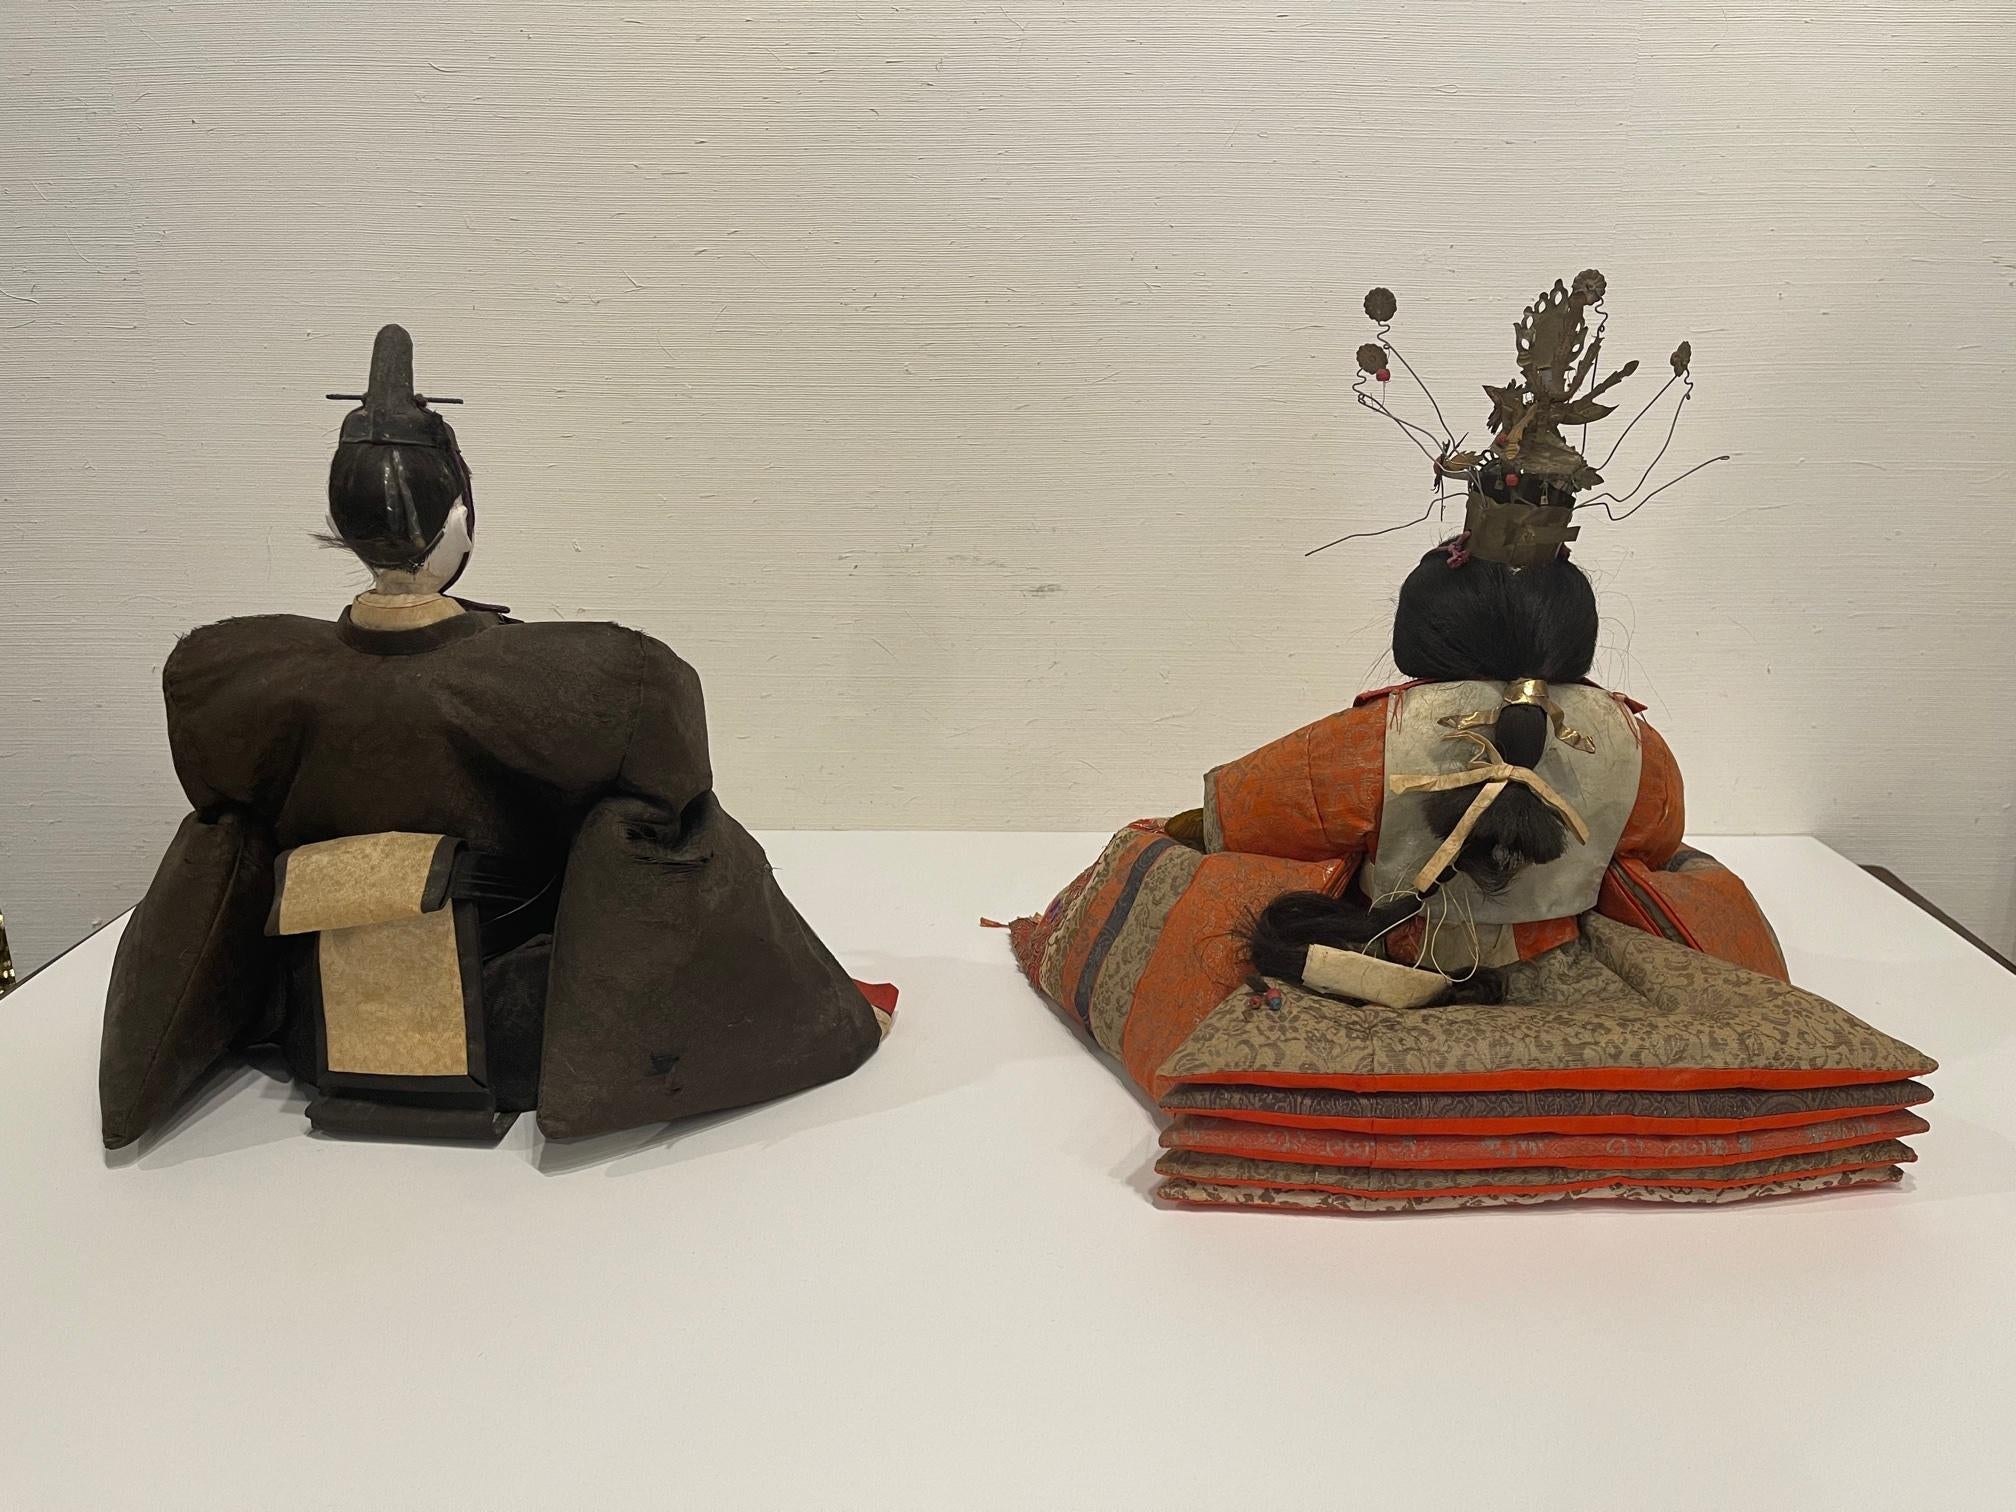 Meiji Antique Japanese Emperor and Empress Figures, Meji Period, Late 19th Century